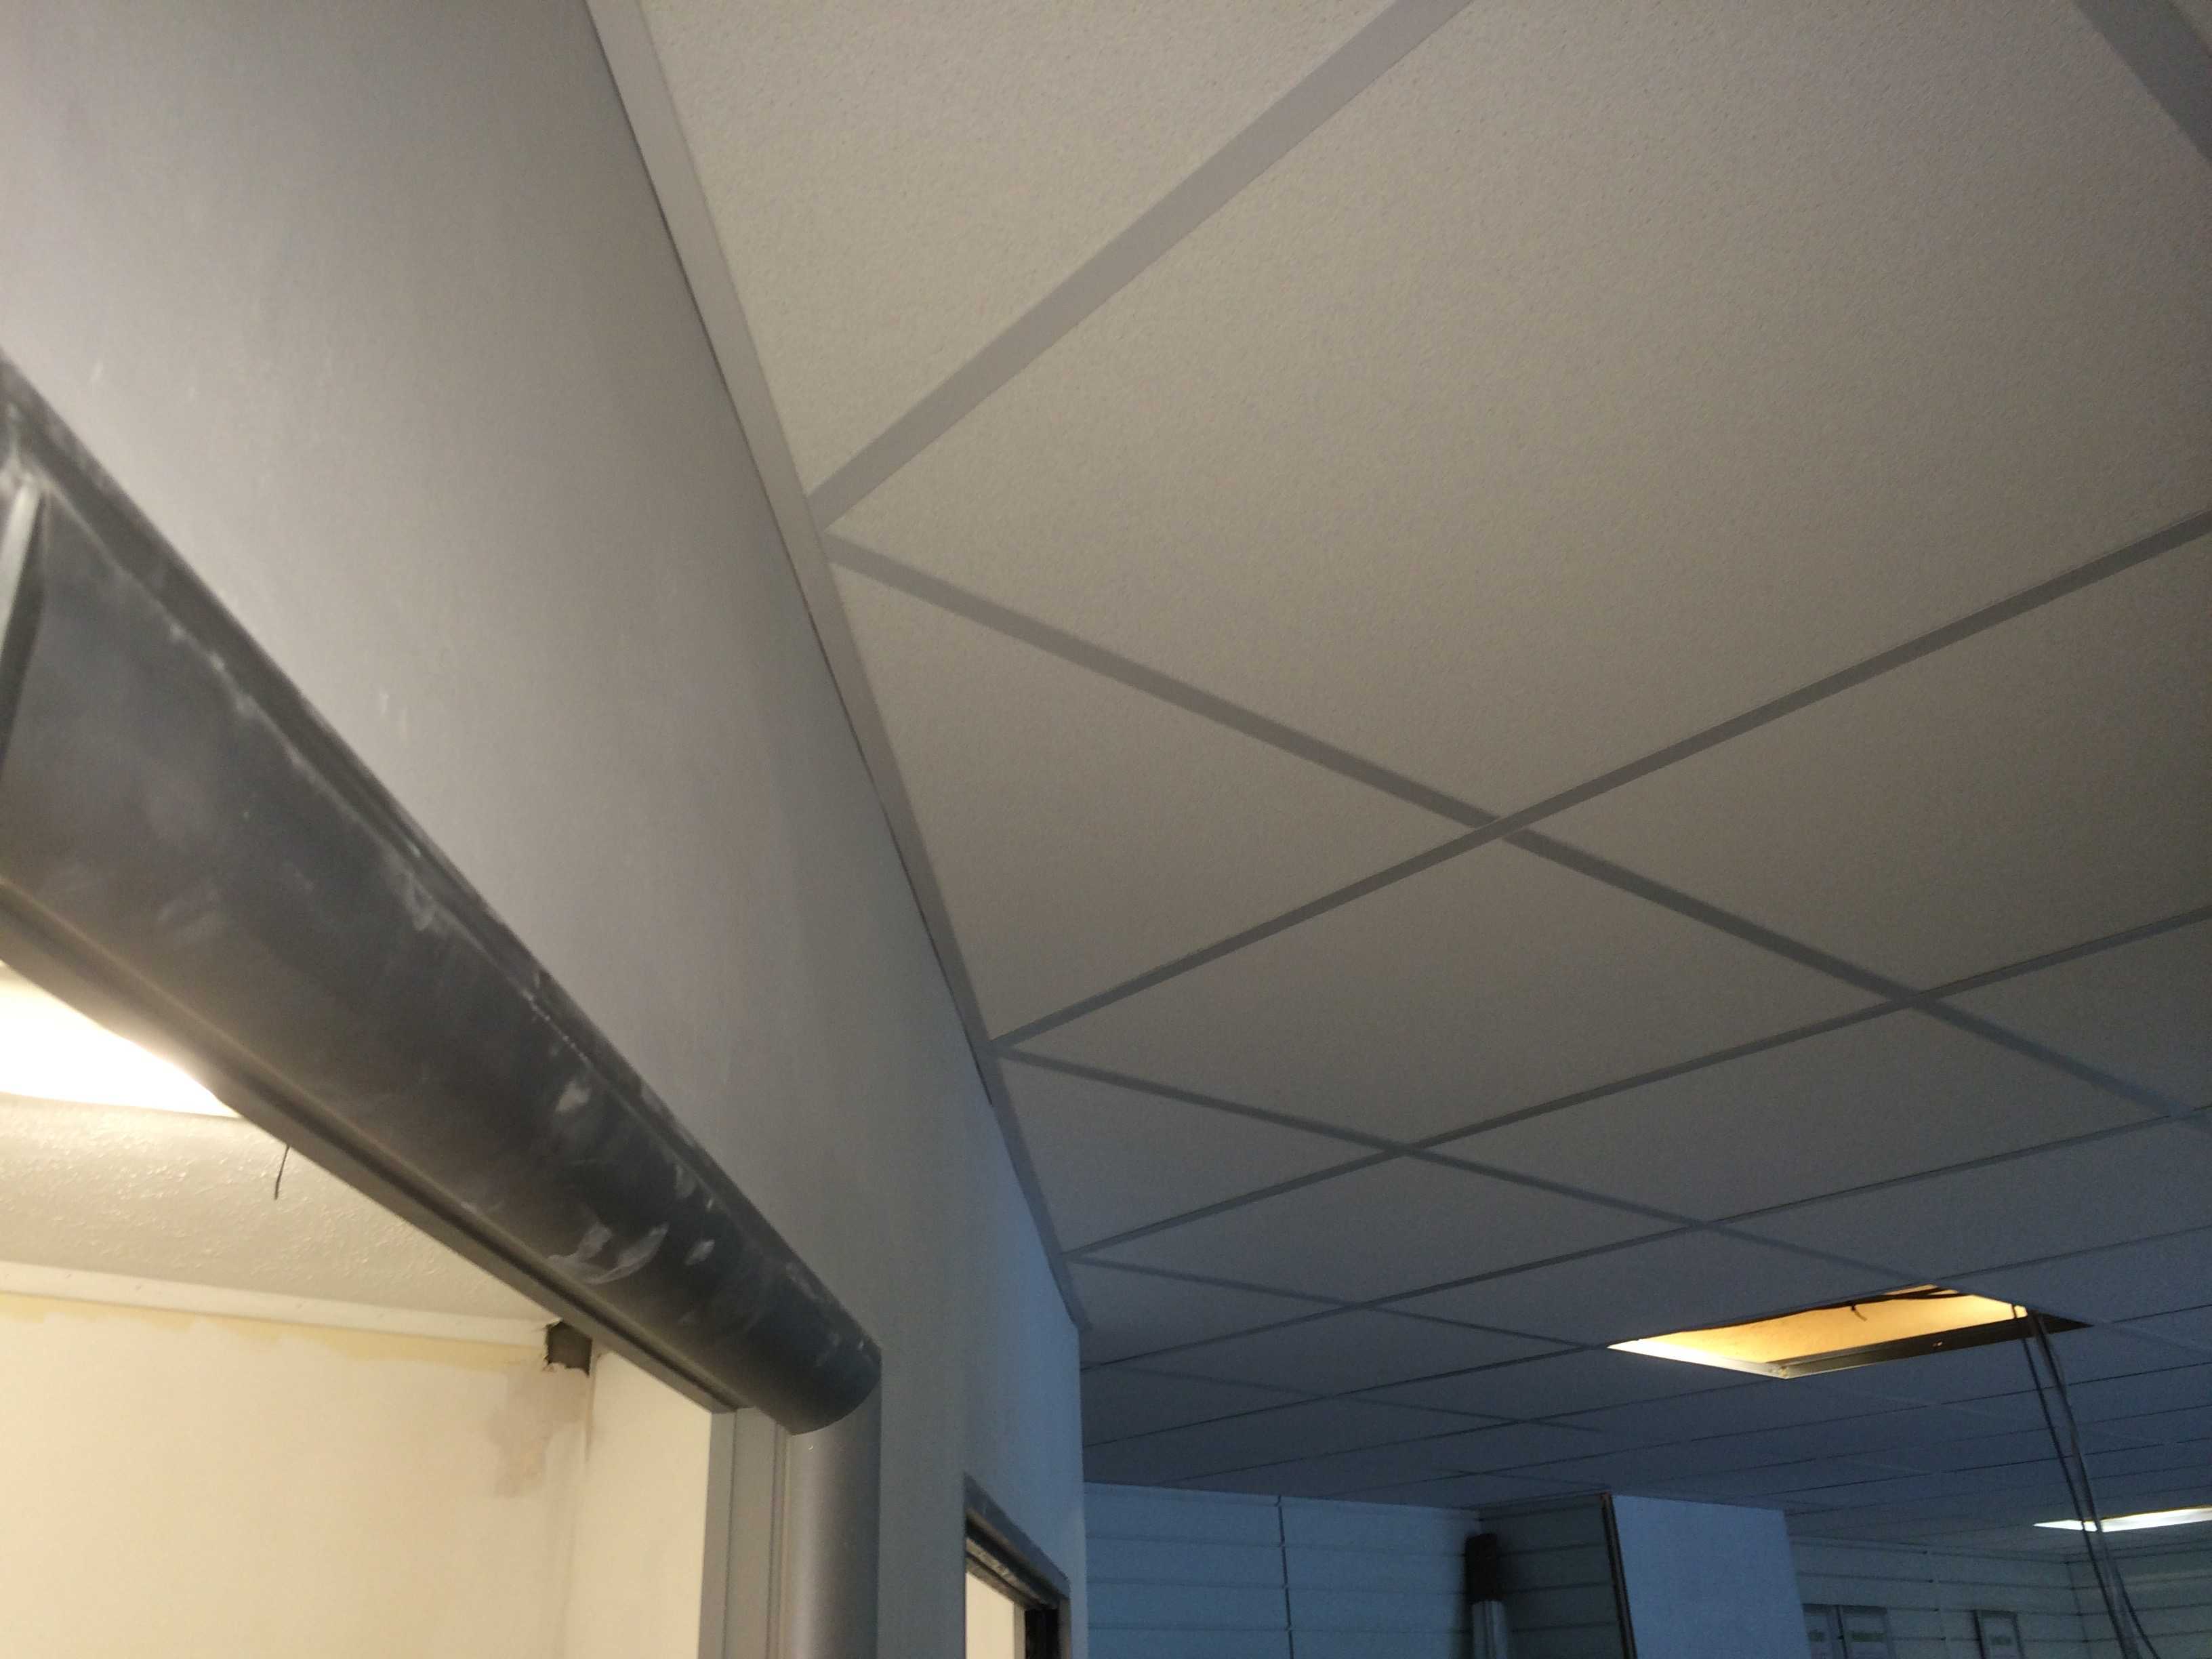  Suspended  ceiling  APAC Installations